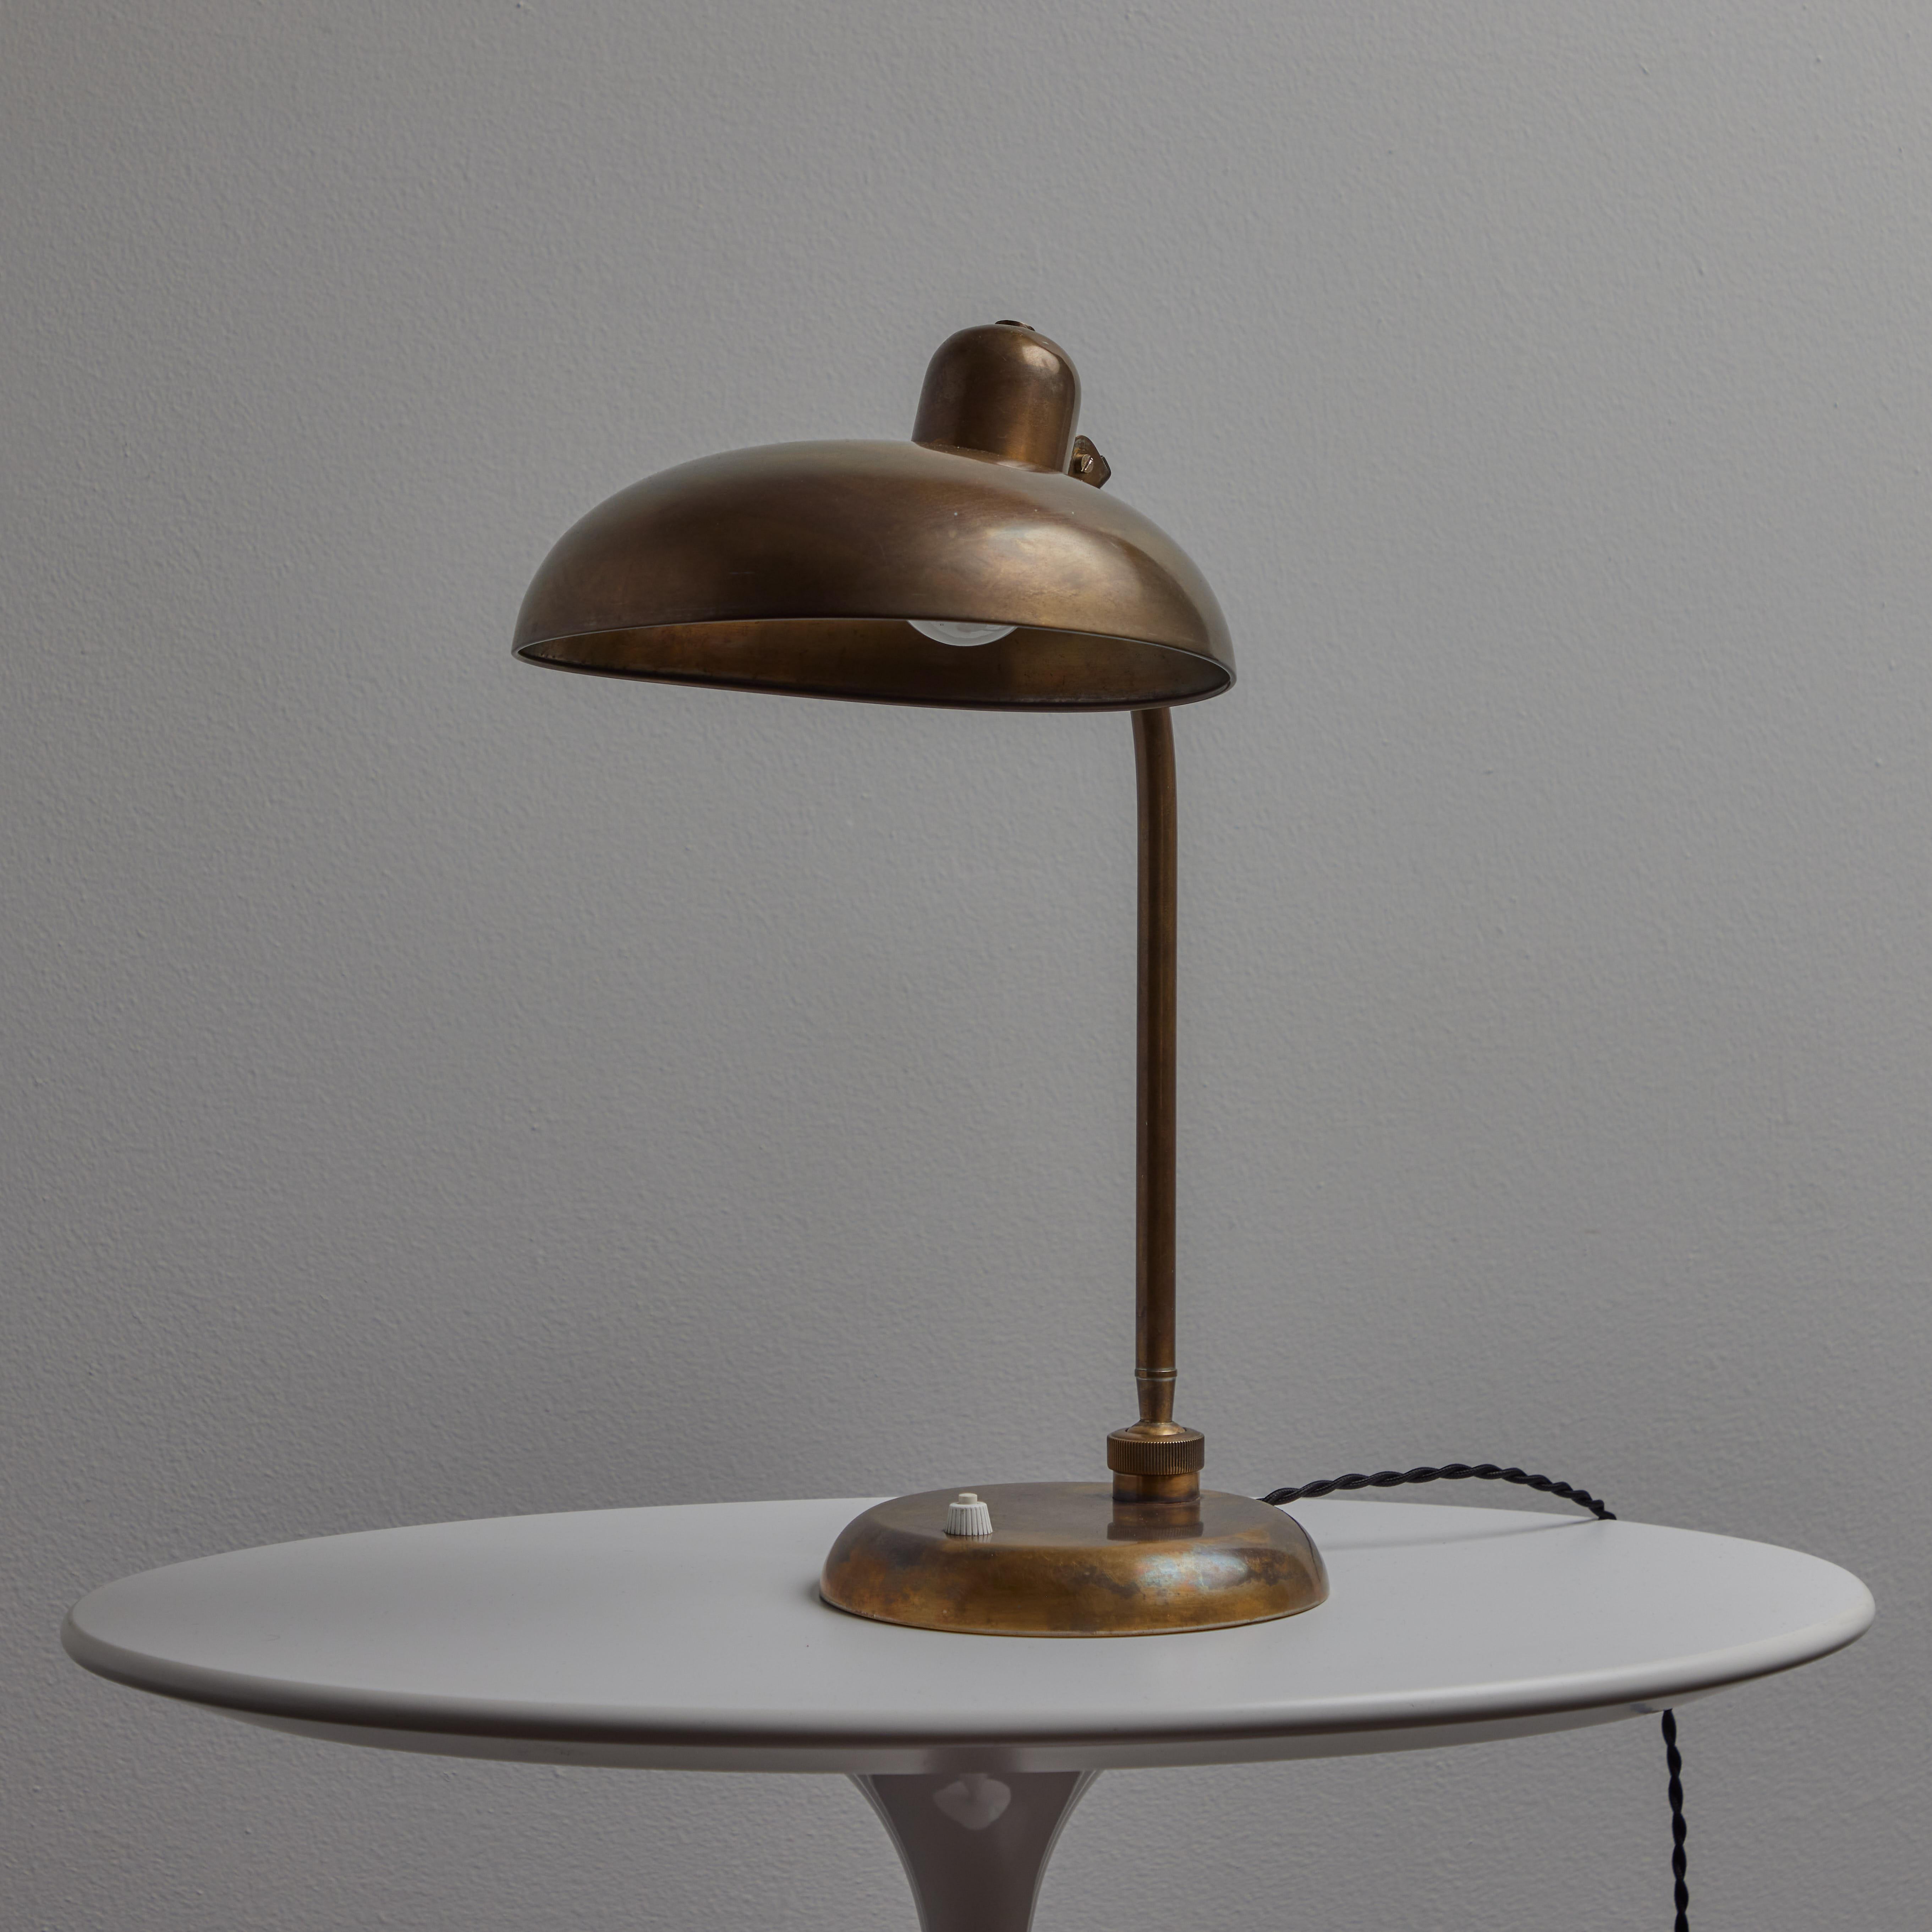 1940s Giovanni Michelucci Patinated Brass Ministerial Table Lamp for Lariolux For Sale 2